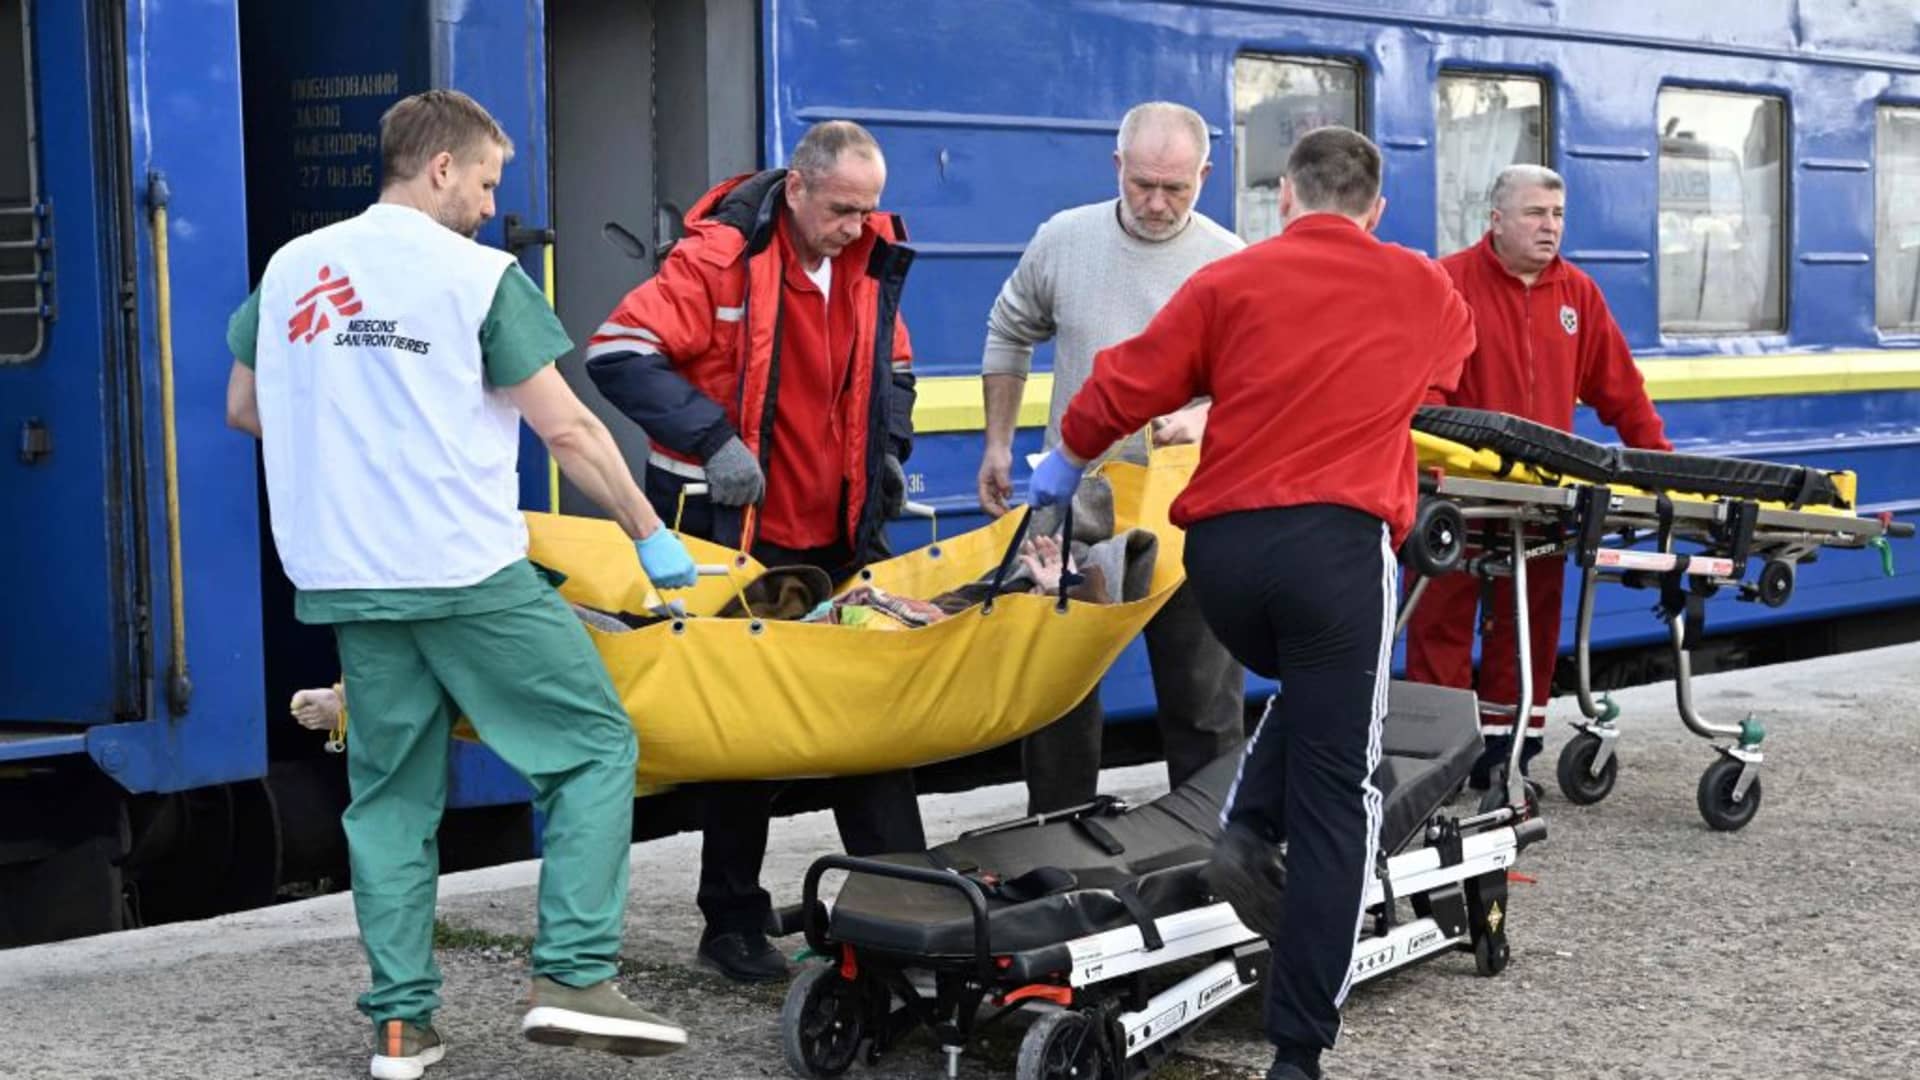 Ambulance workers and MSF medics transfer a patient to an ambulance in the western Ukrainian city of Lviv on April 10, 2022